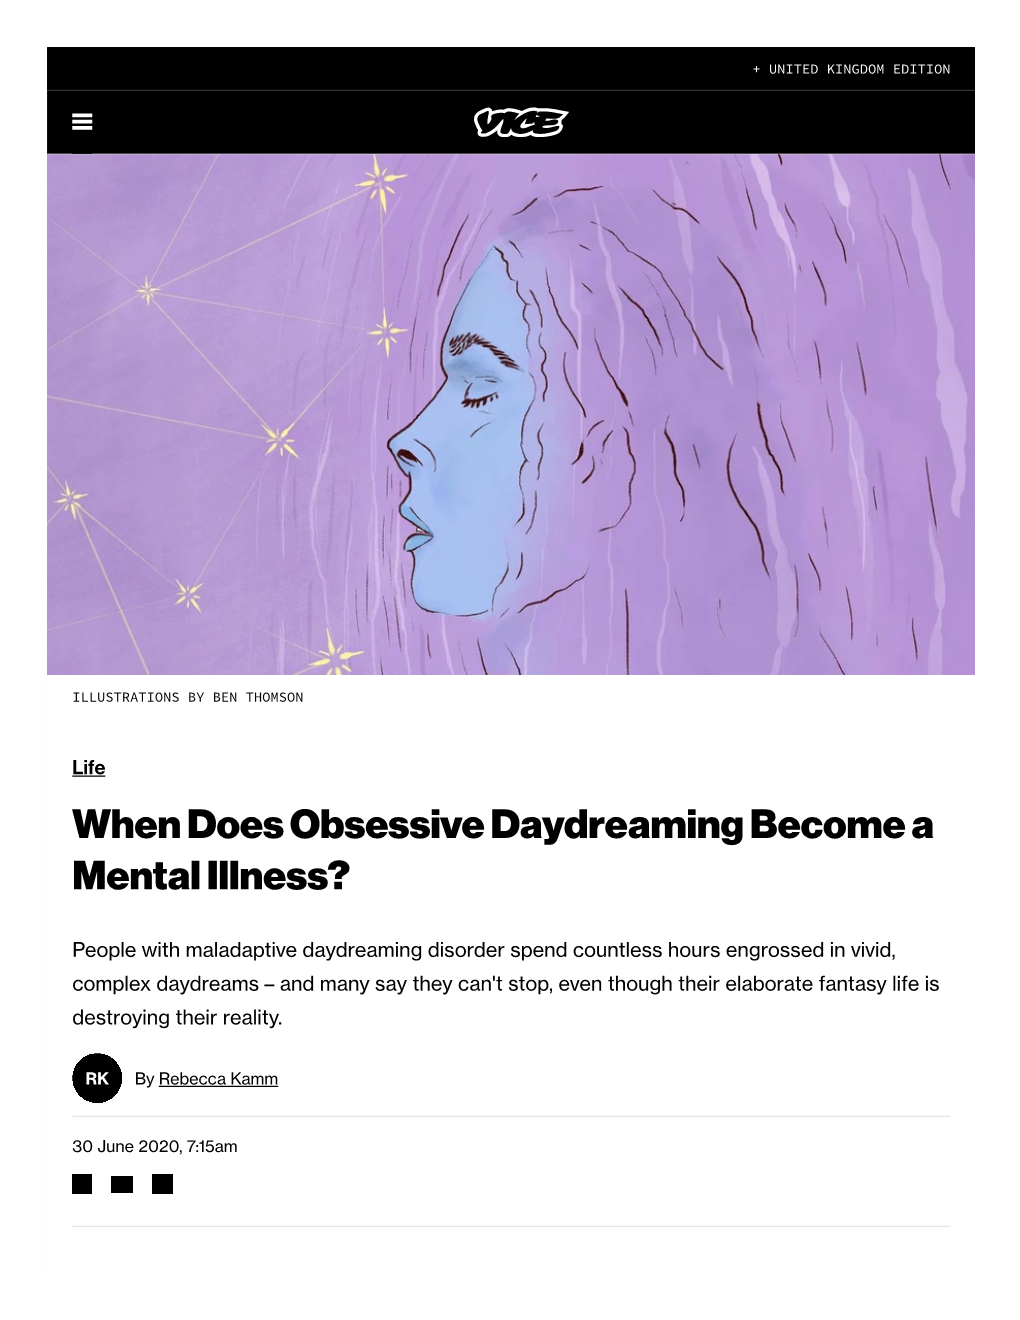 When Does Obsessive Daydreaming Become a Mental Illness?